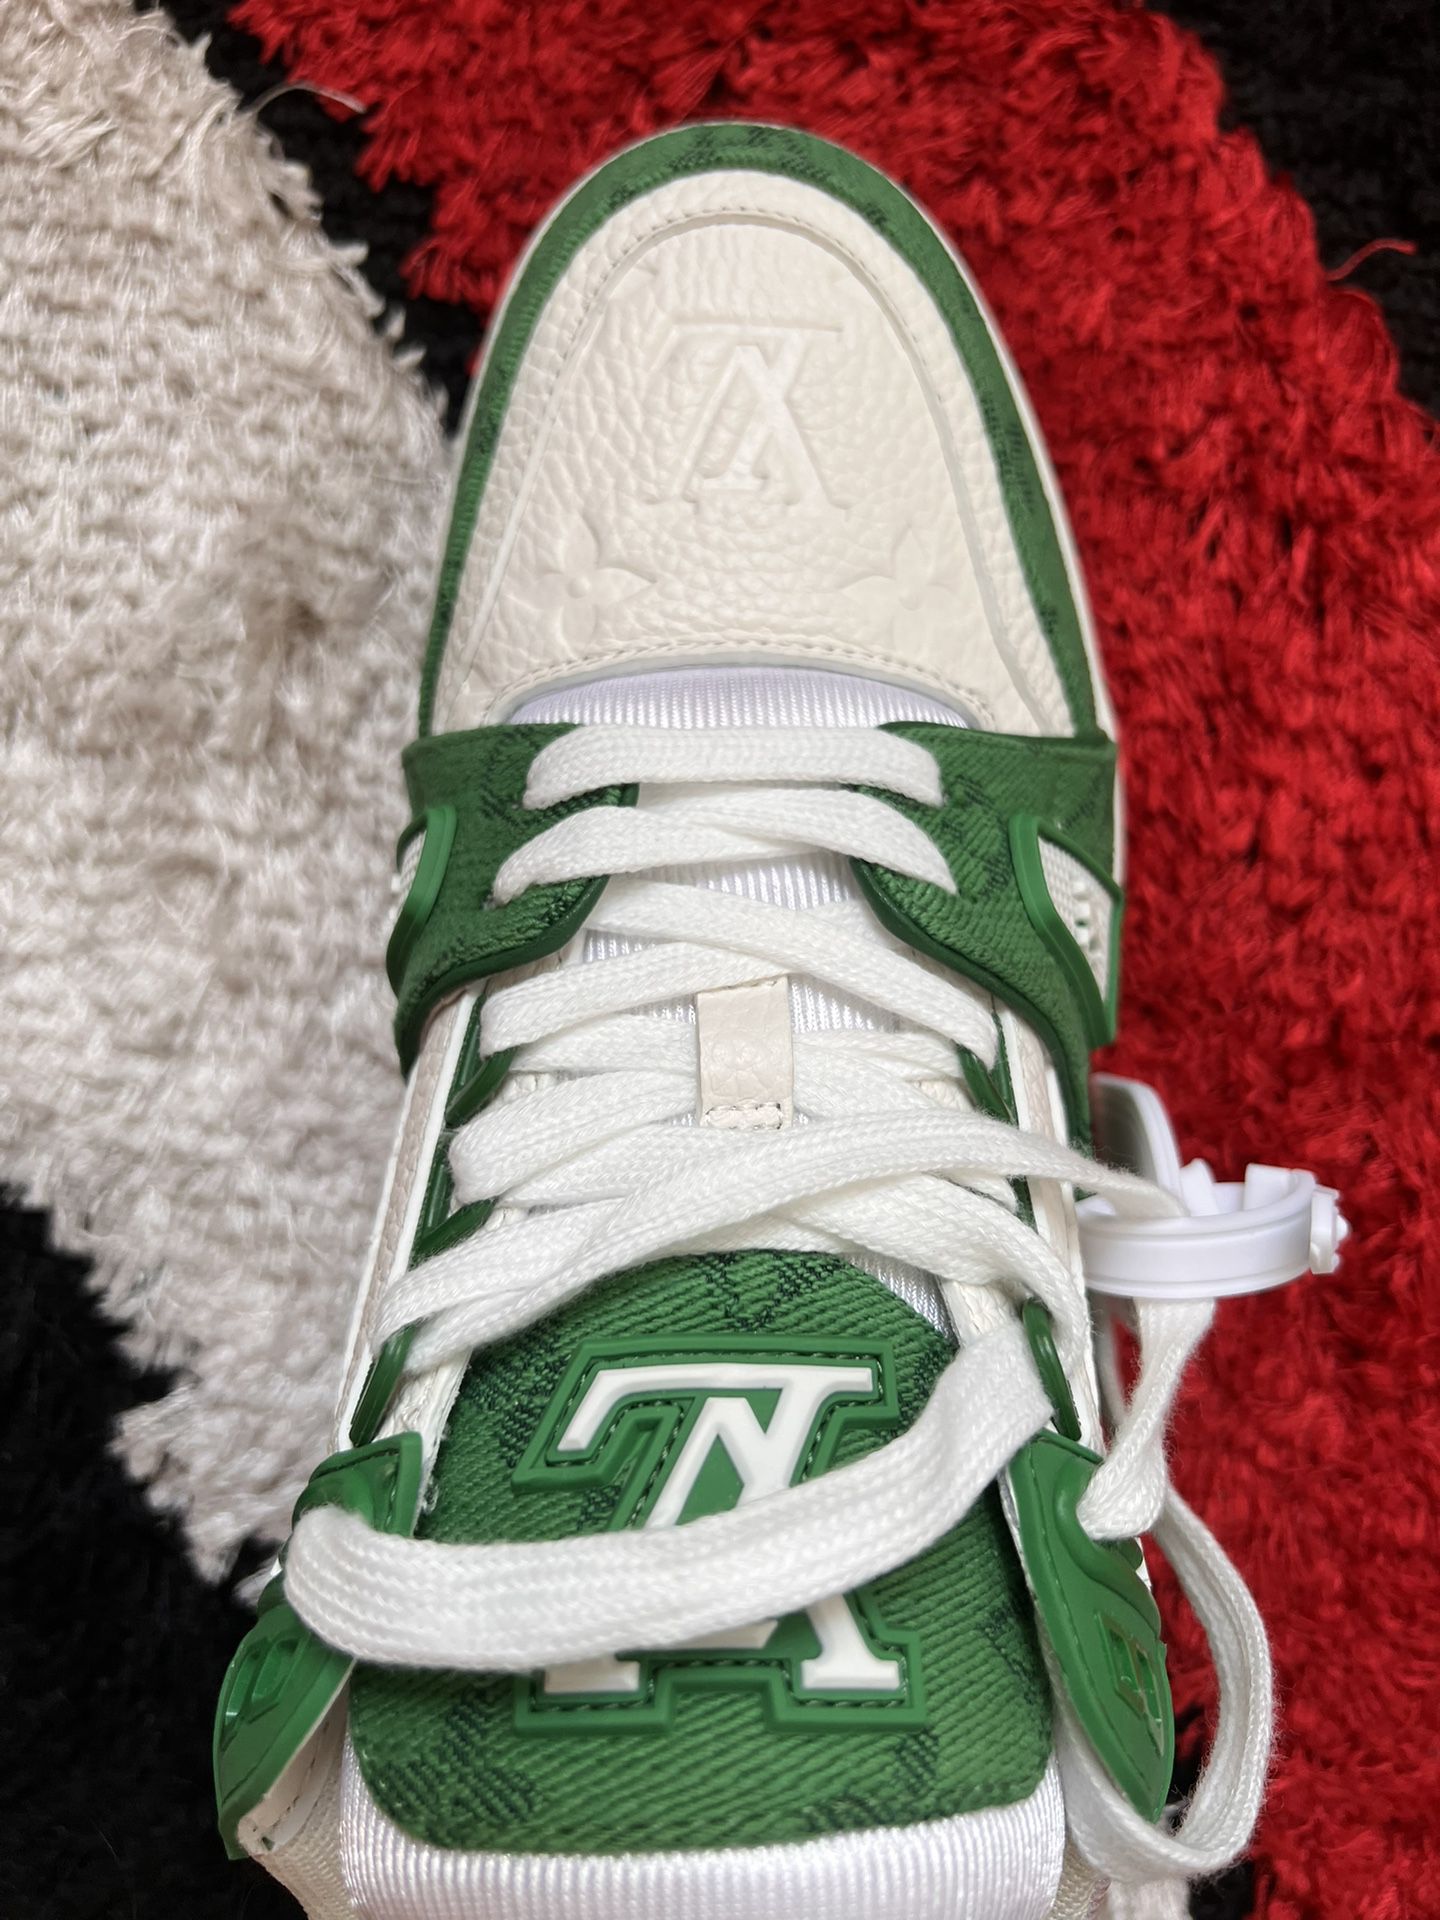 Louis Vuitton Trainer 508 for Sale in Queens, NY - OfferUp